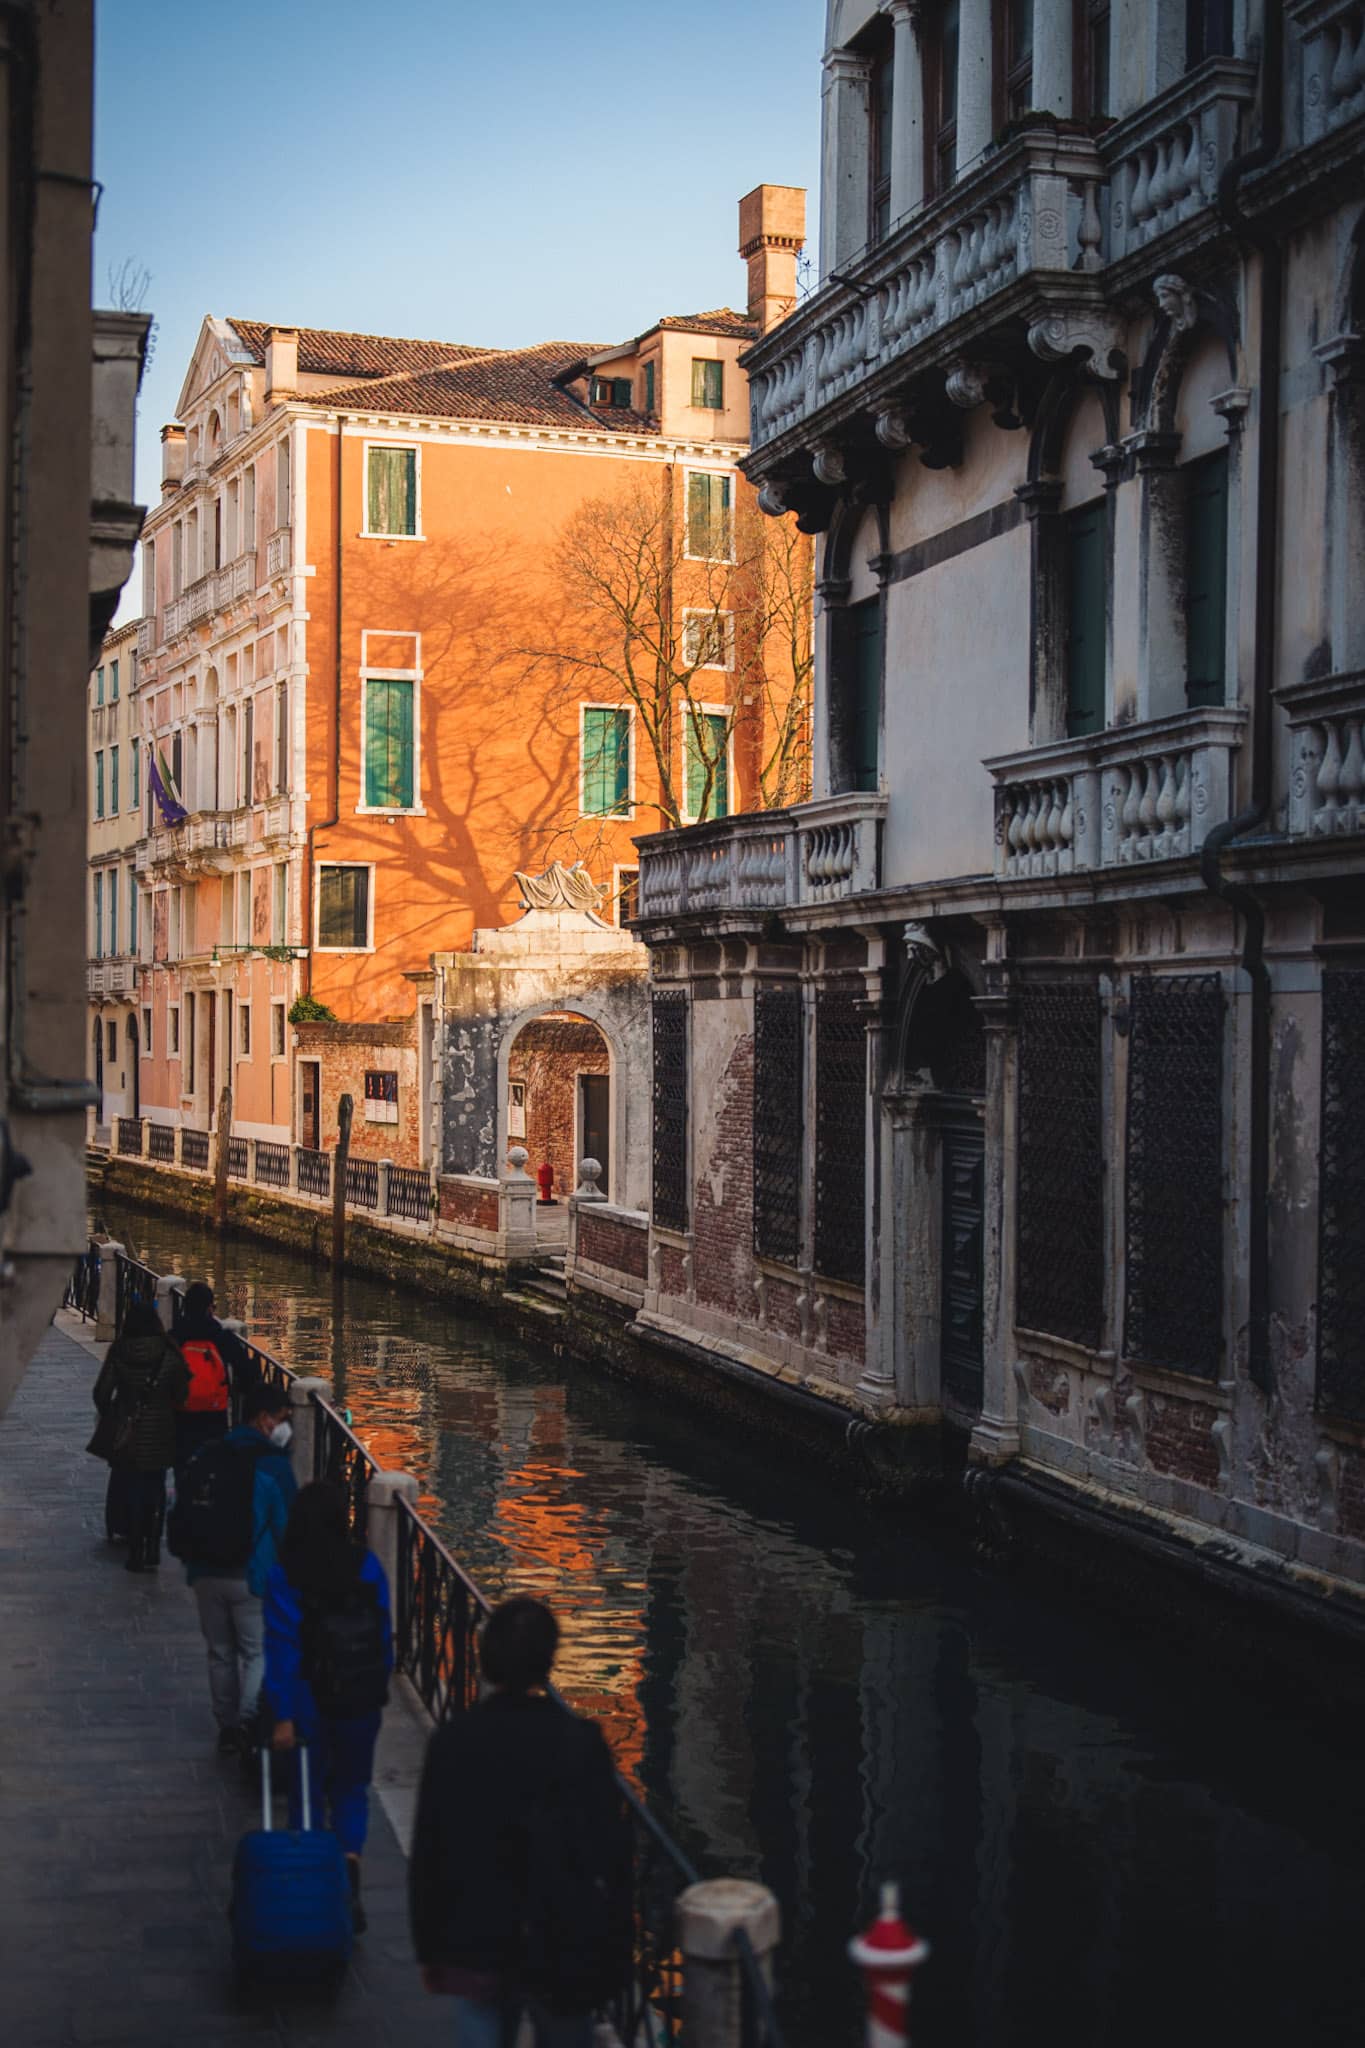 sunset shadows and lights in a venetian canal